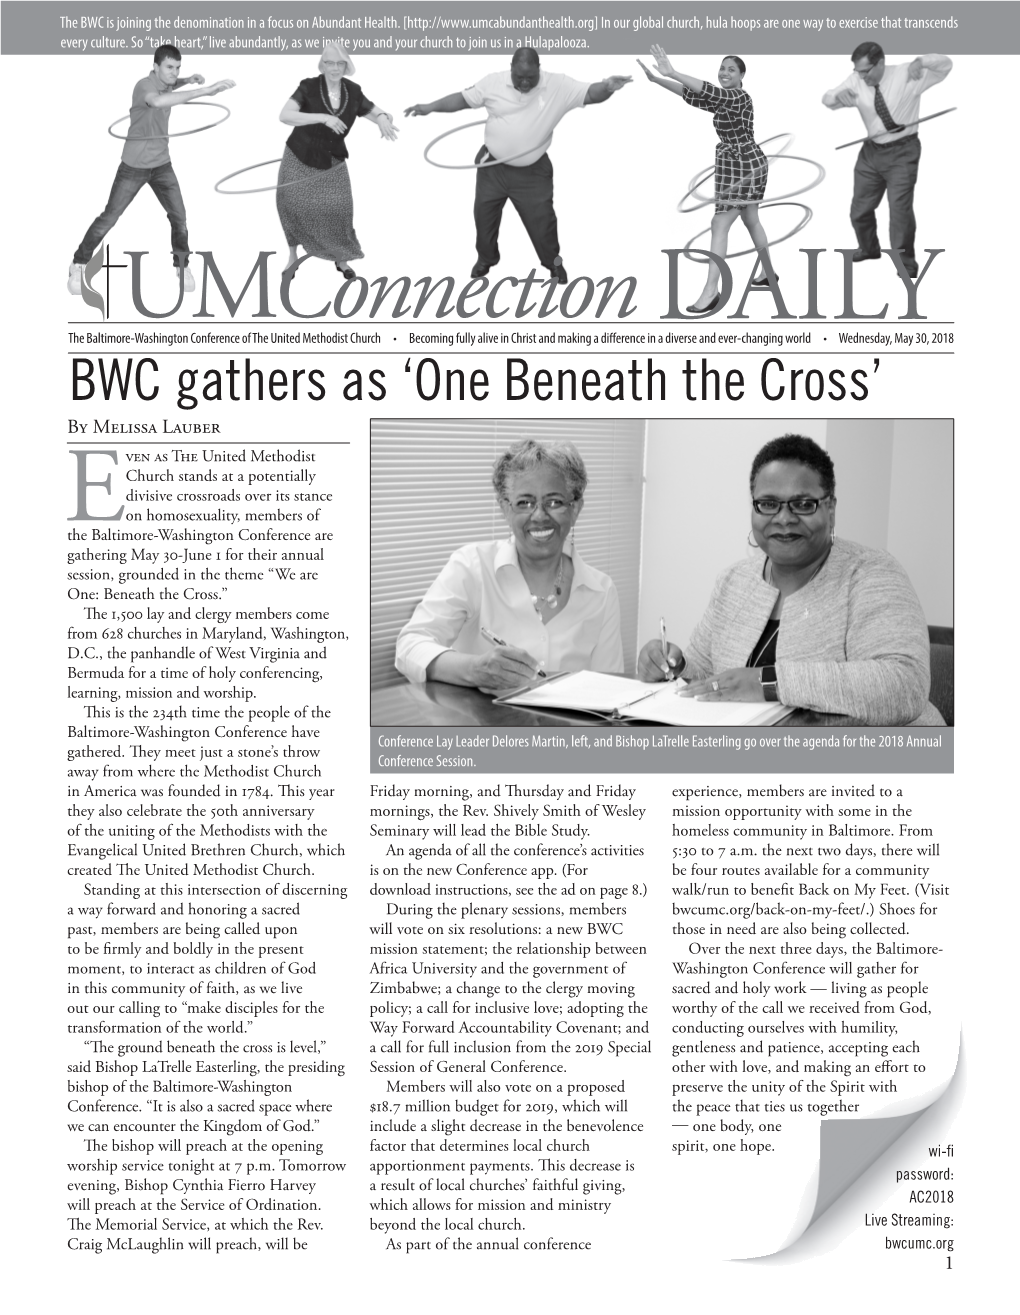 BWC Gathers As 'One Beneath the Cross'